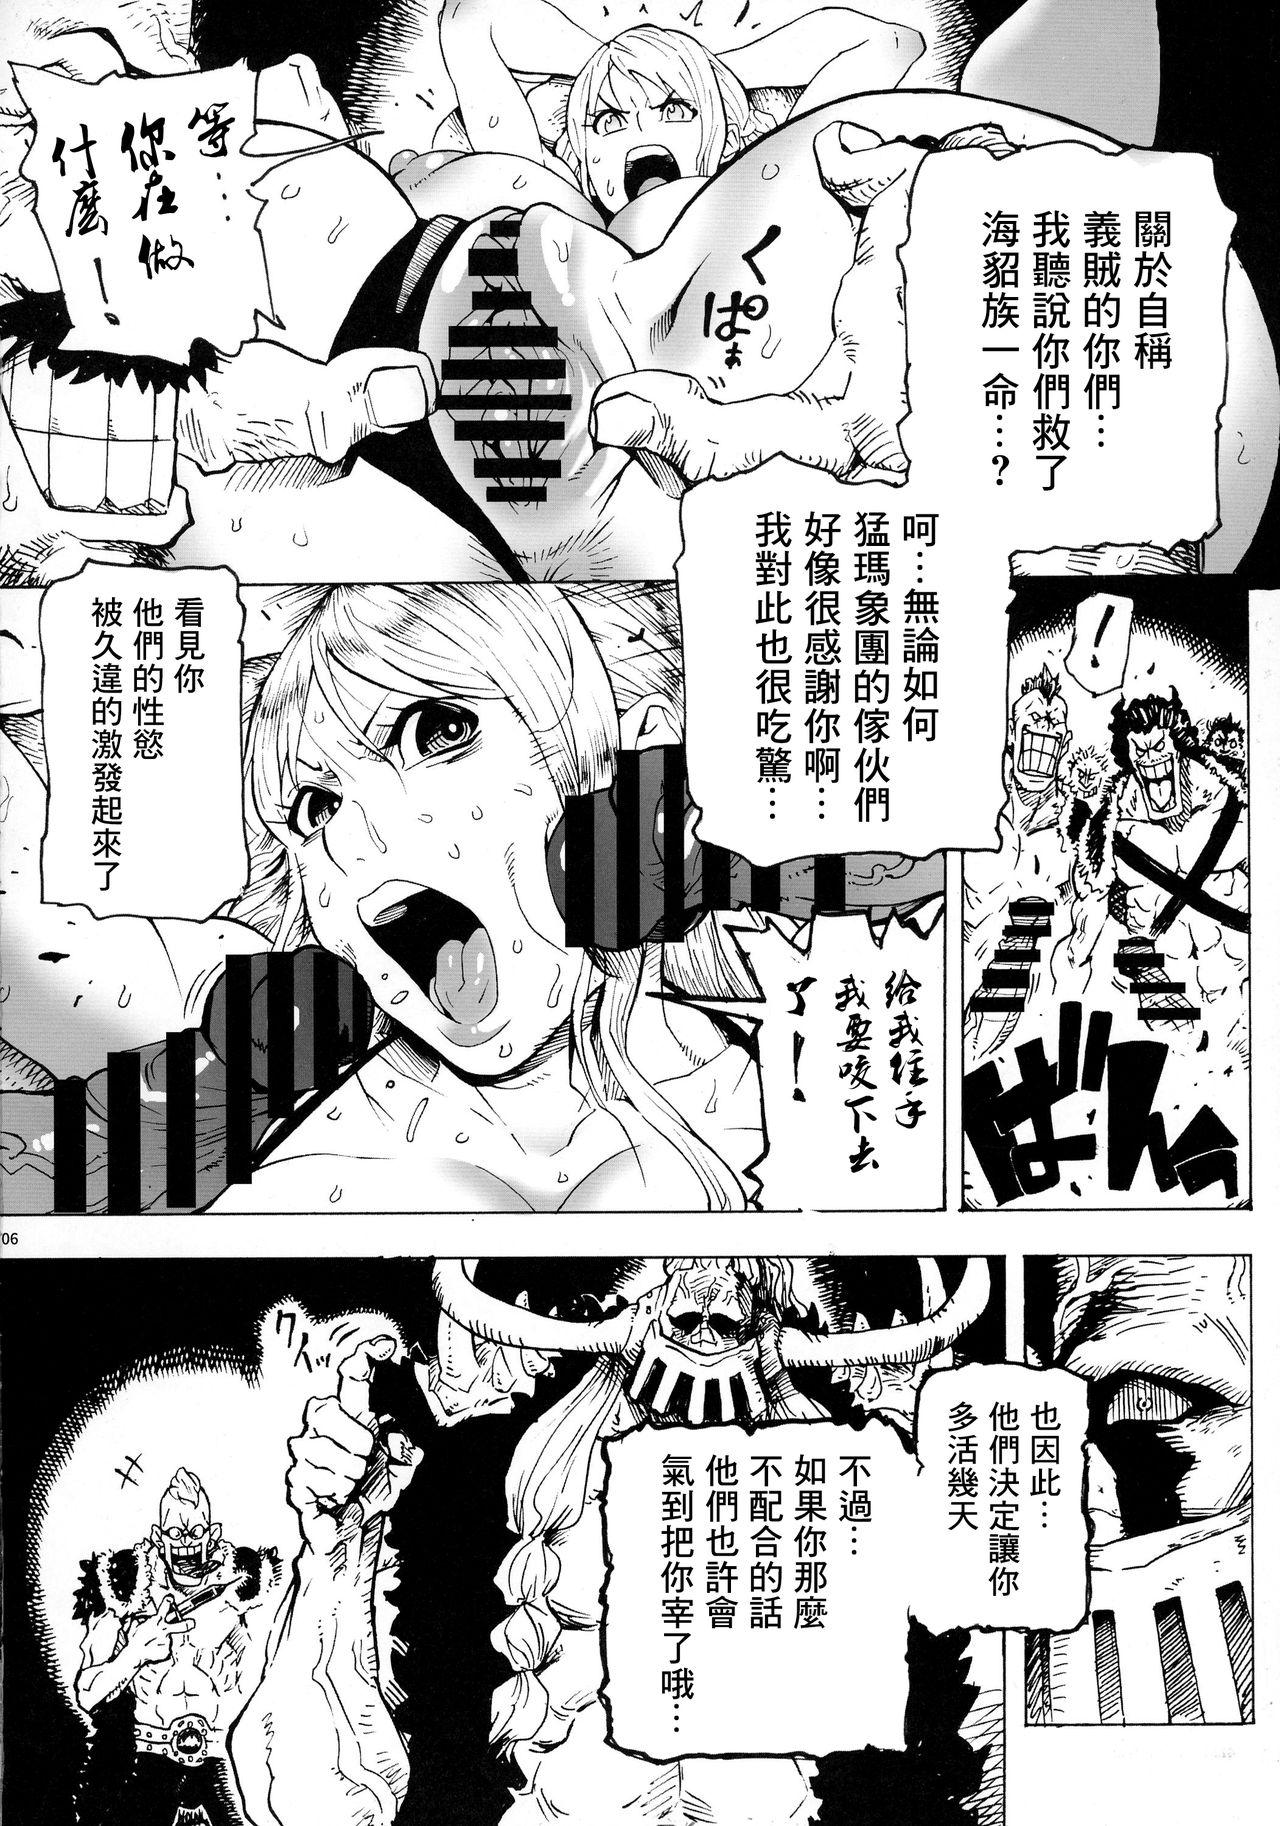 Lesbian P.O.M Another Episode "J.A.C.K" - One piece Zorra - Page 9